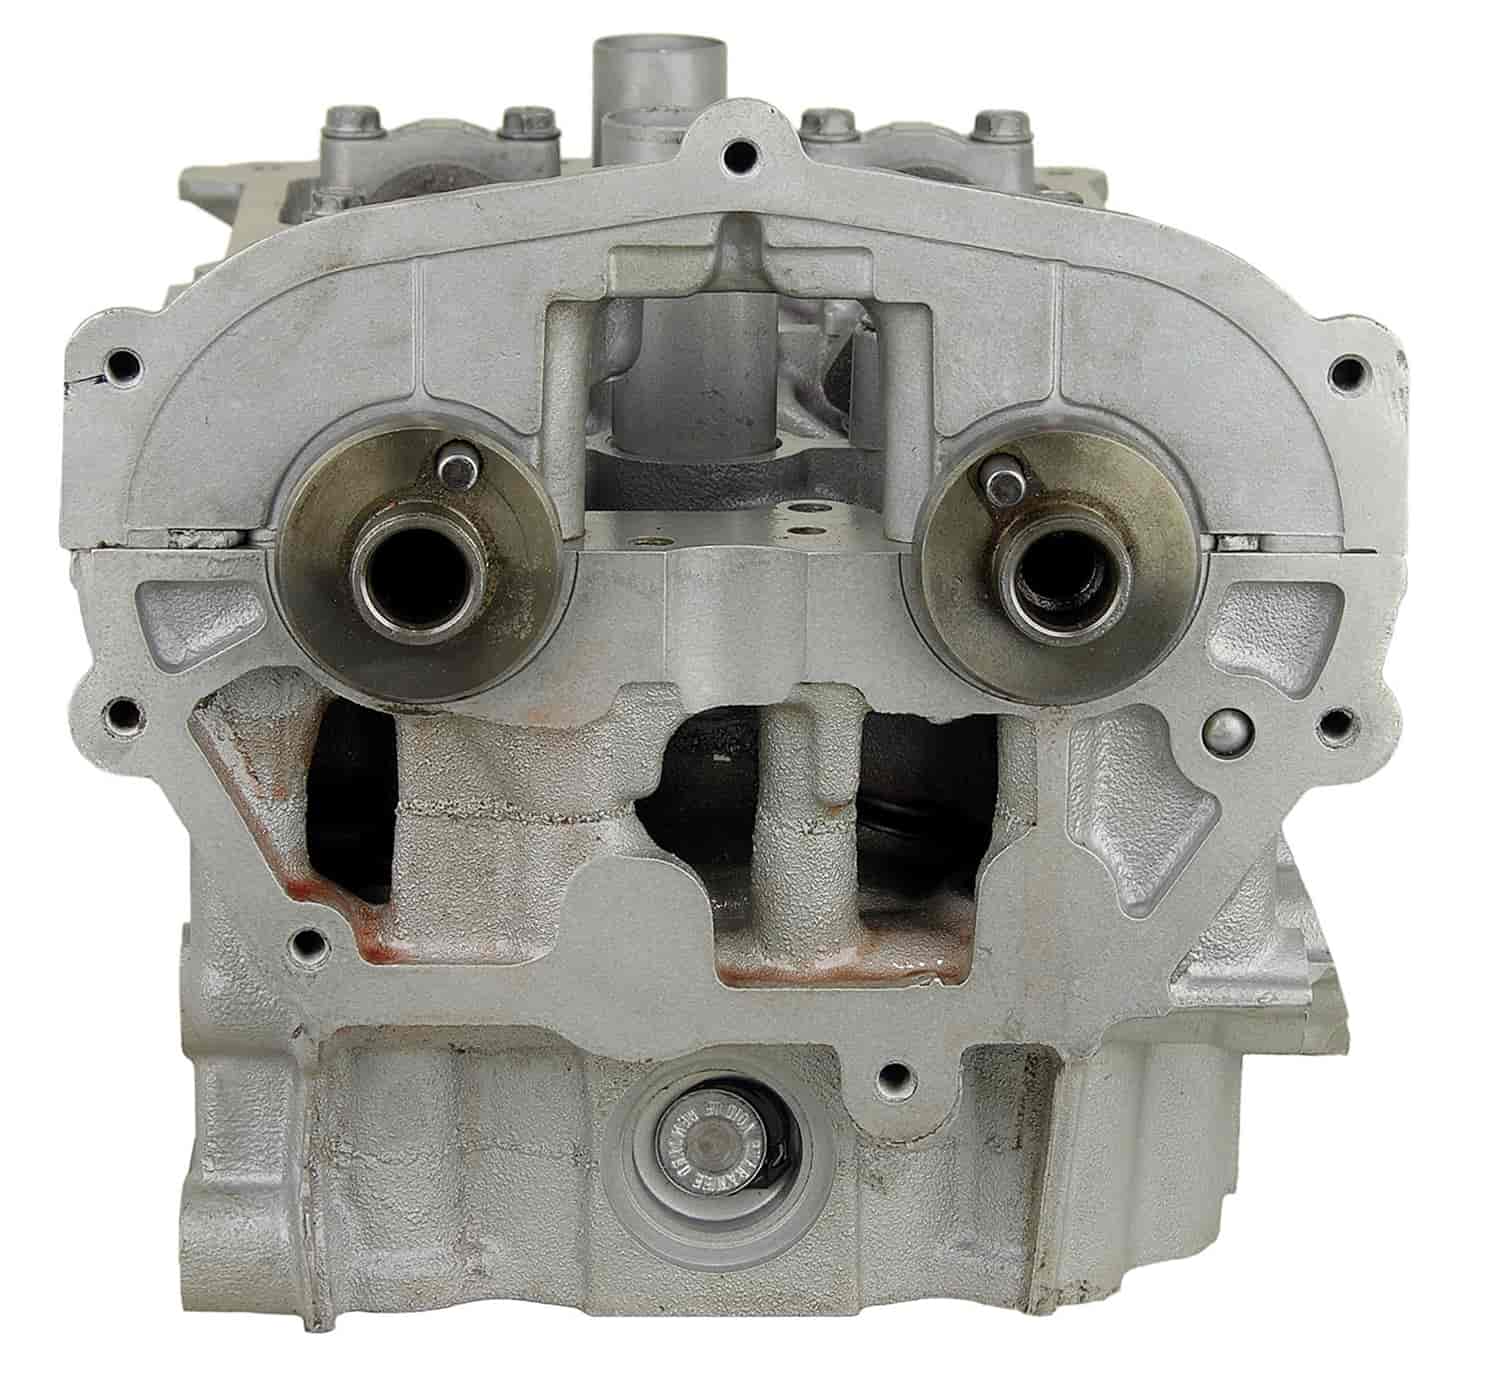 Remanufactured Cylinder Head for 1999-2001 Nissan/Infiniti with 3.0L V6 VQ30DE